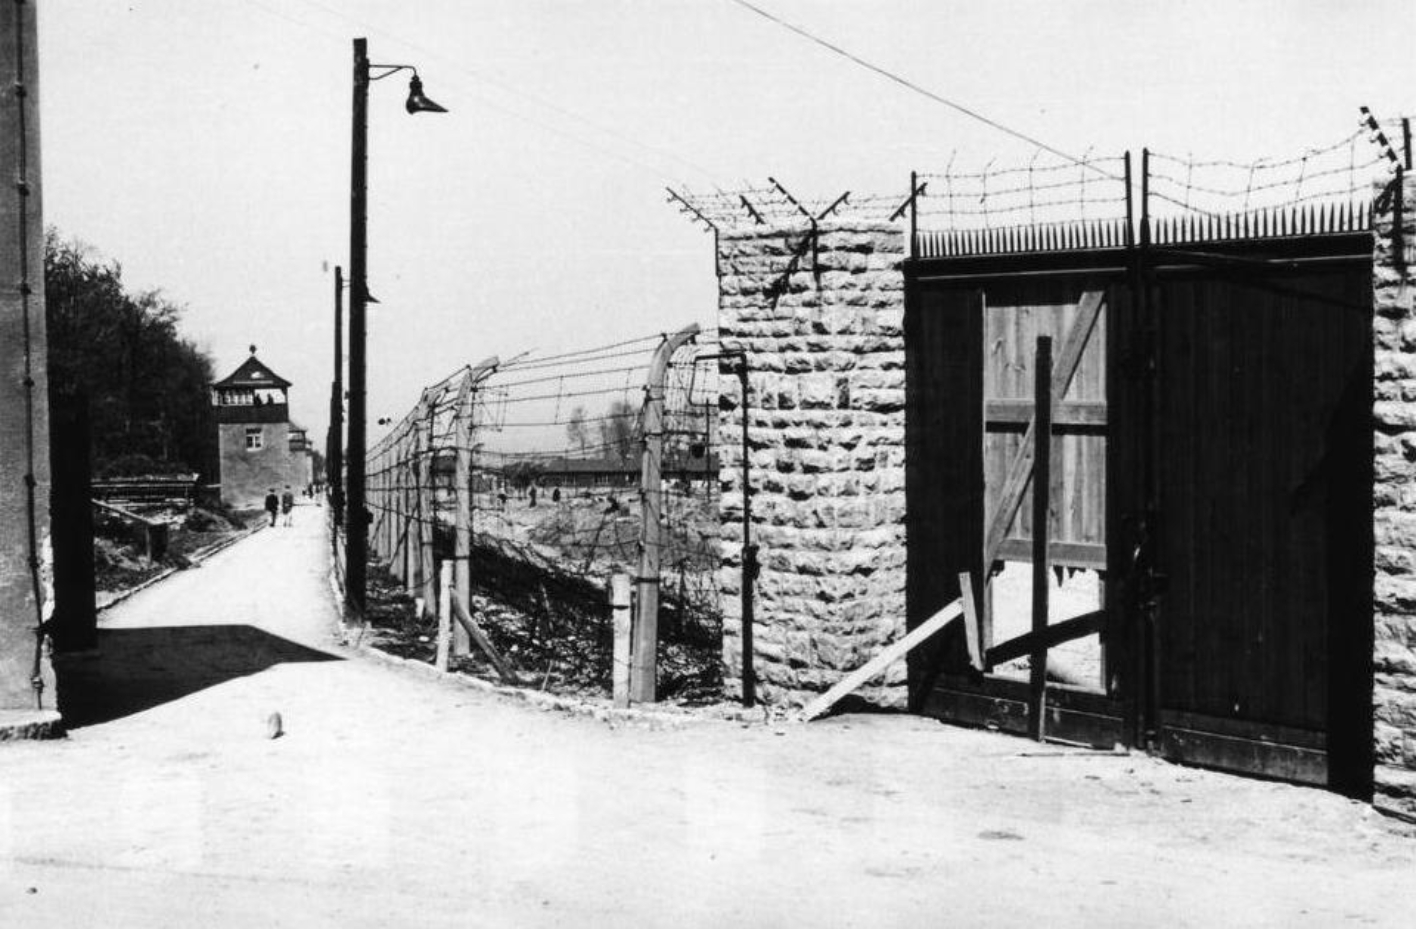 On the left, the post path runs straight along the camp fence. Guard towers can be seen at regular intervals along the path. On the right side of the picture, a gate in the camp fence, provisionally closed with wooden boards, can be seen. The fence consists of high posts that are bent inward at the top, into the camp. Barbed wires are stretched between them. 